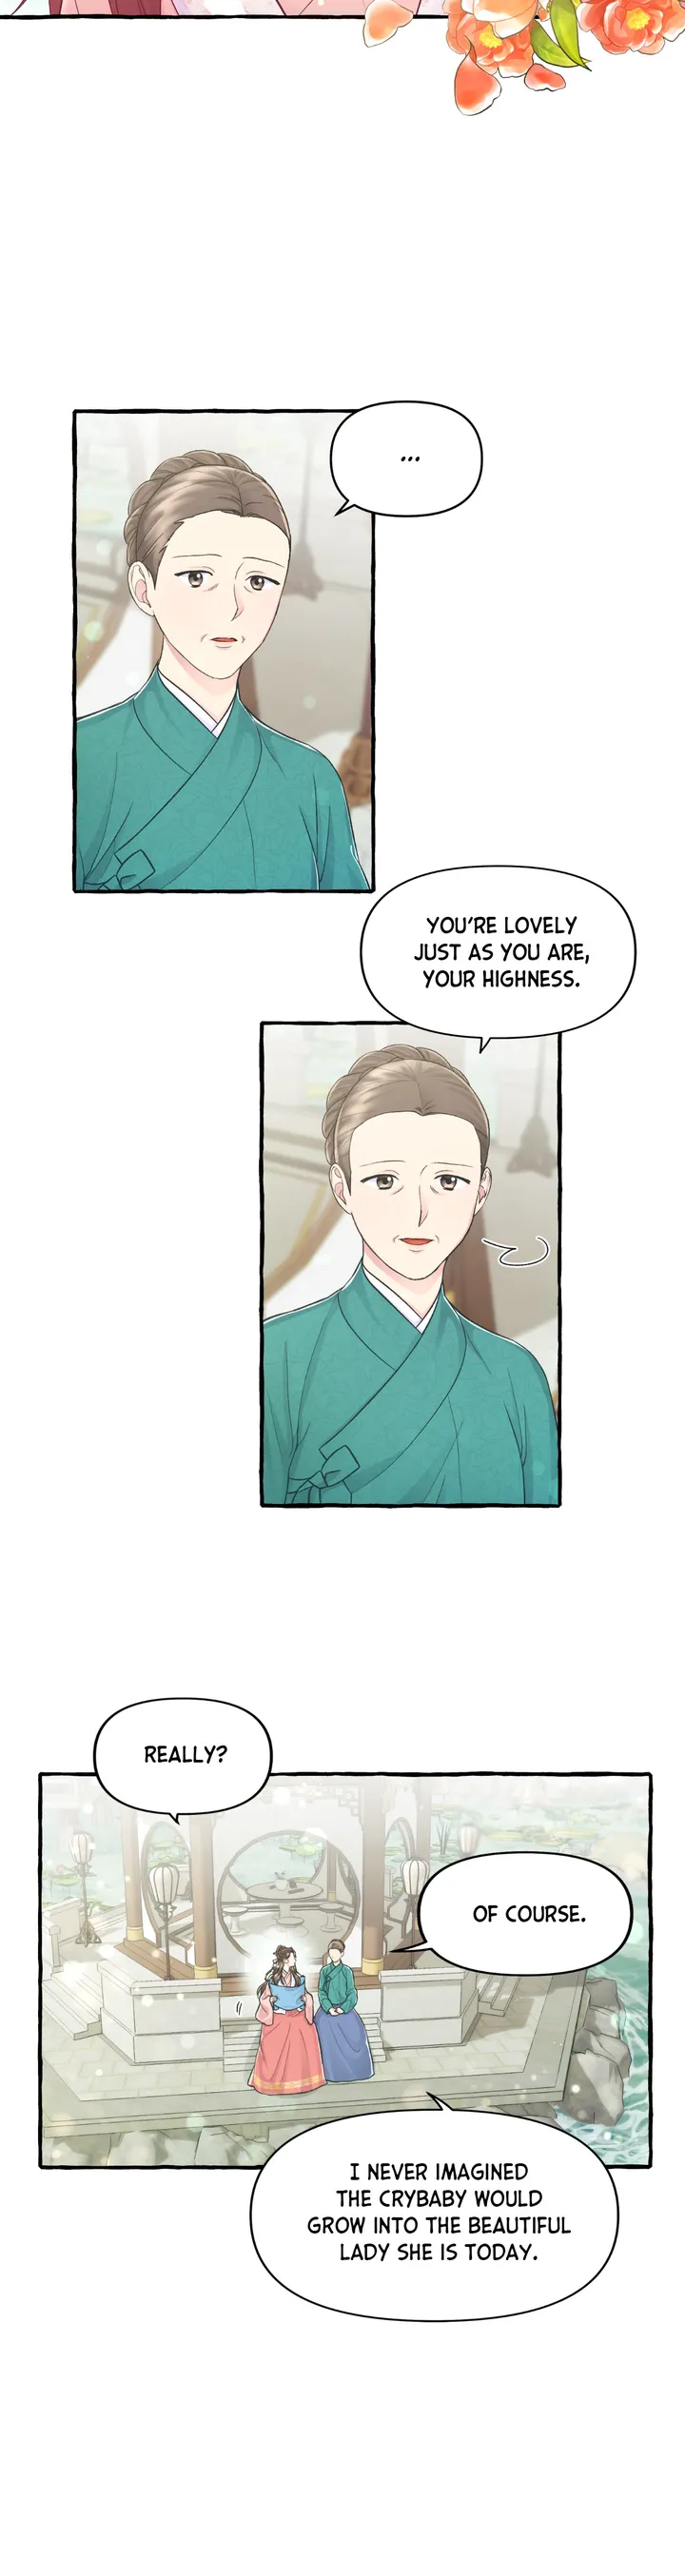 Cheer Up, Your Highness! chapter 1